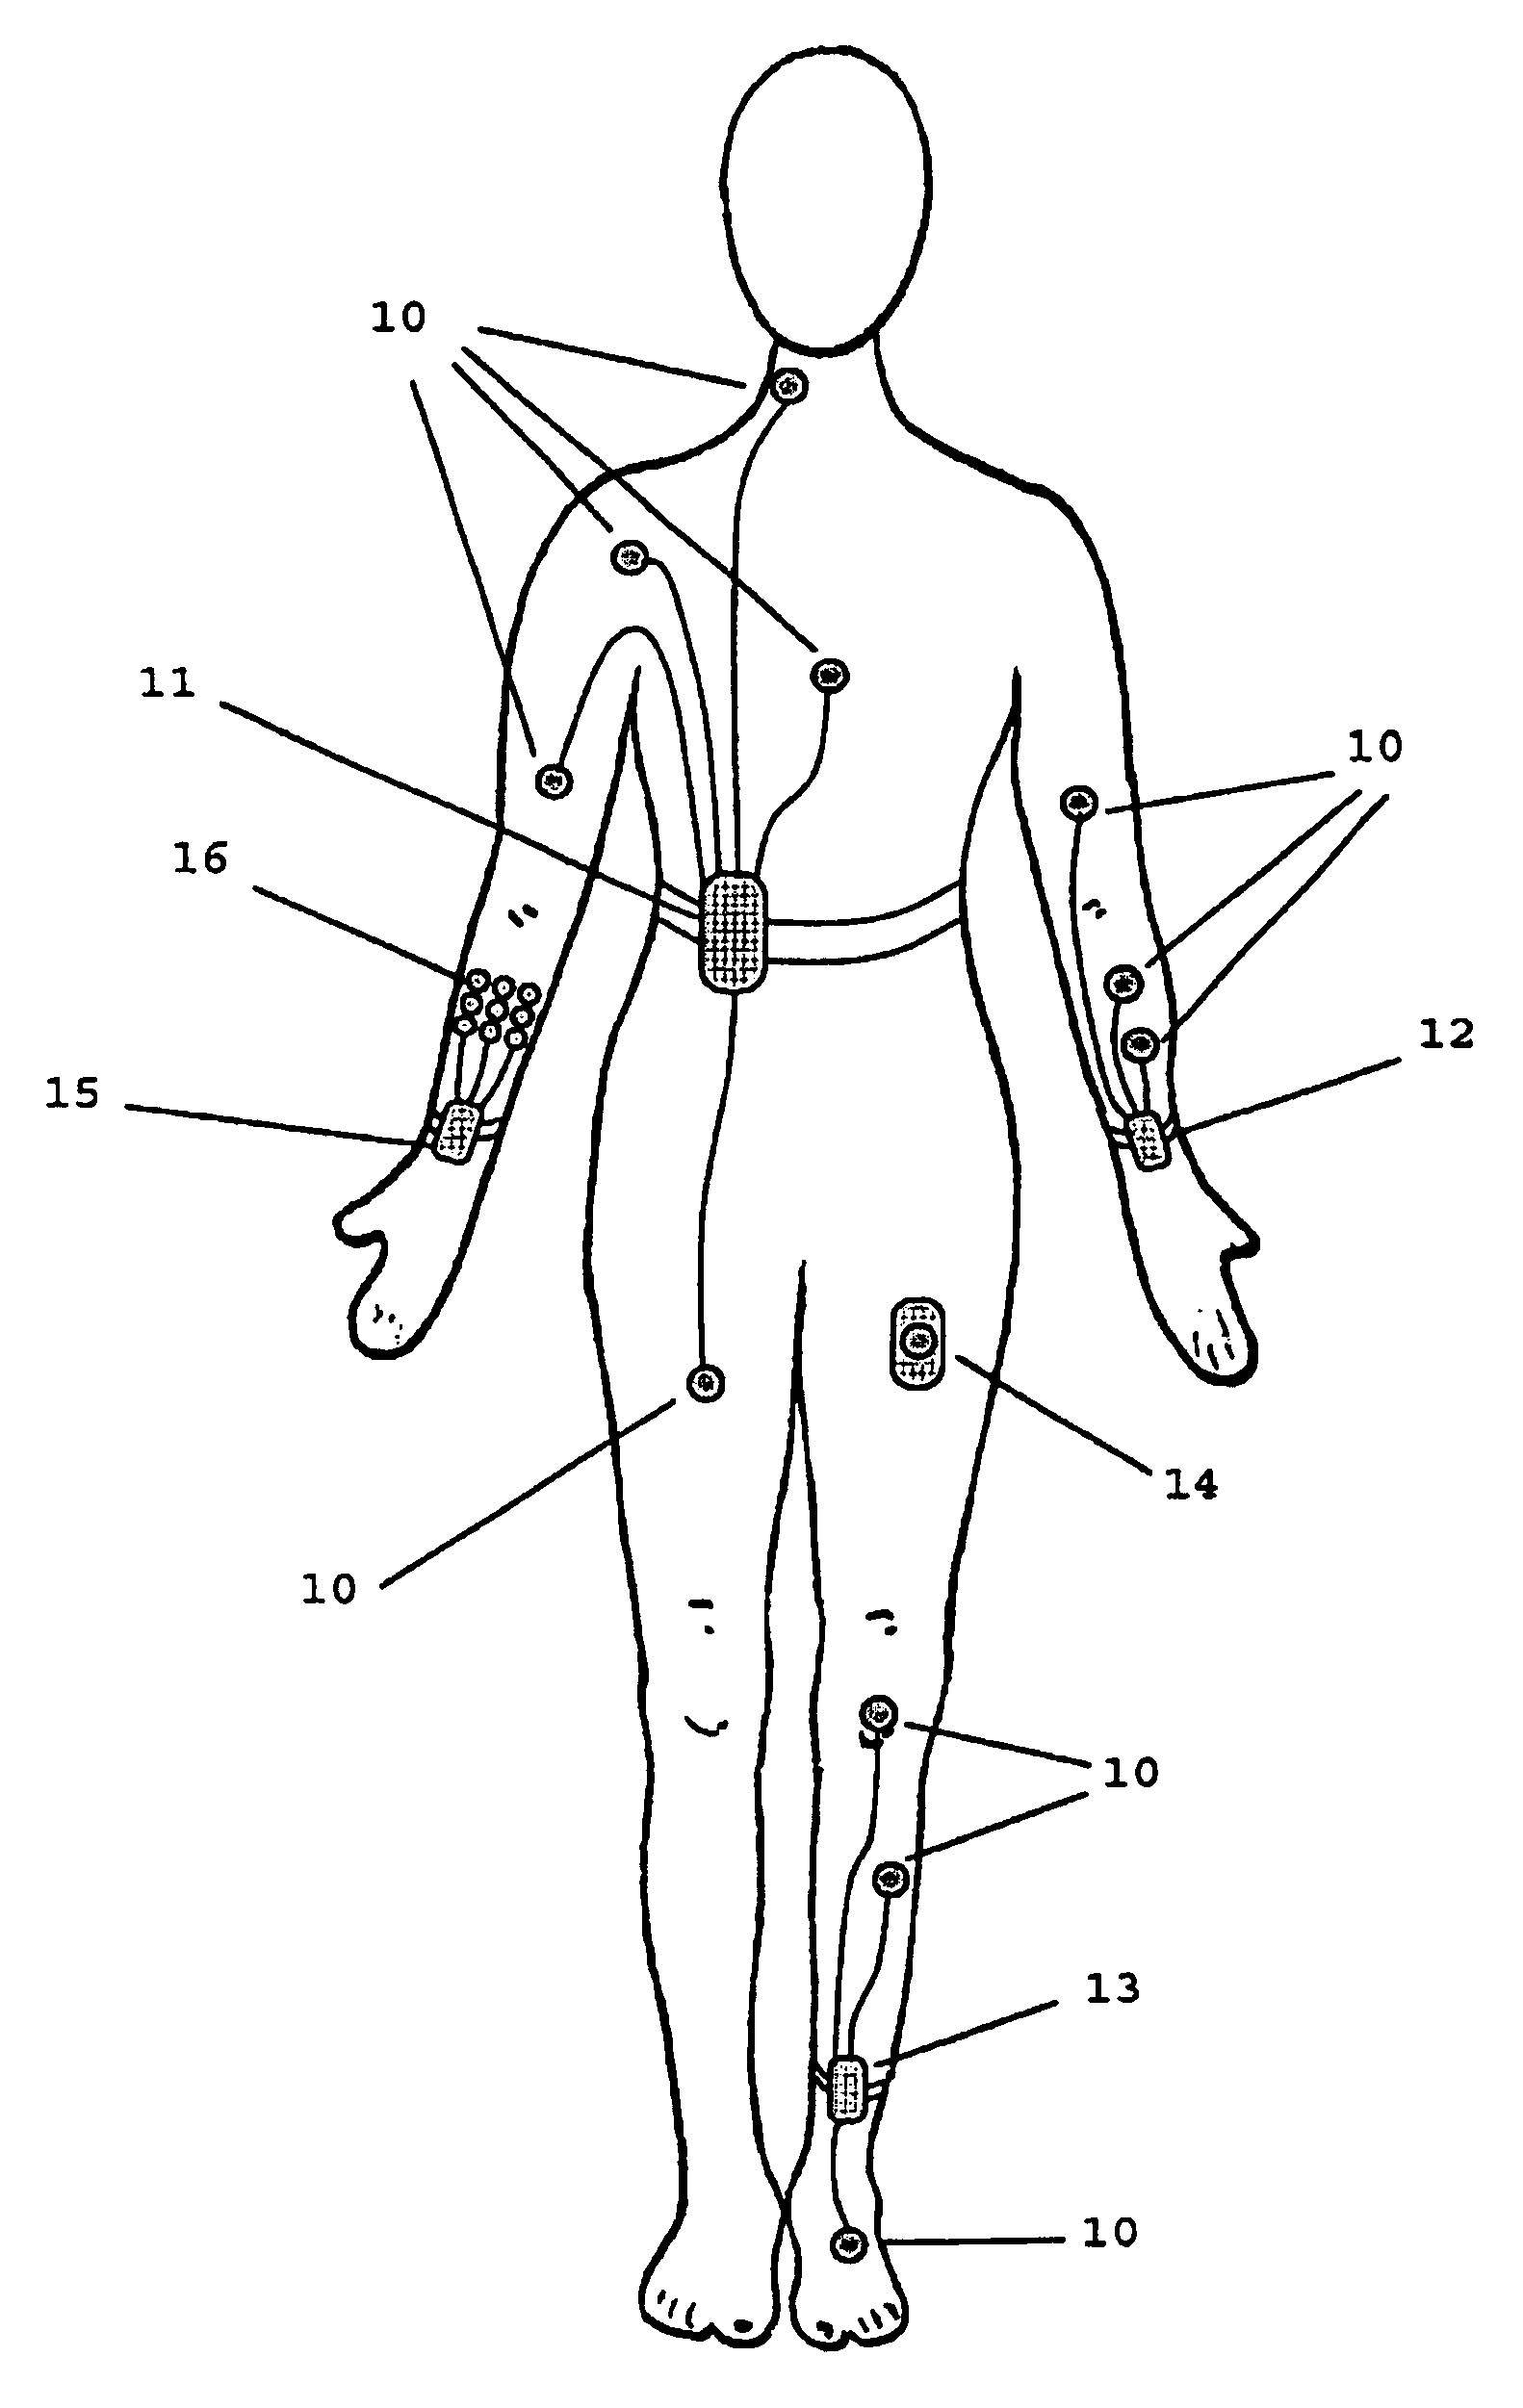 Method and apparatus for sensing body gesture, posture and movement